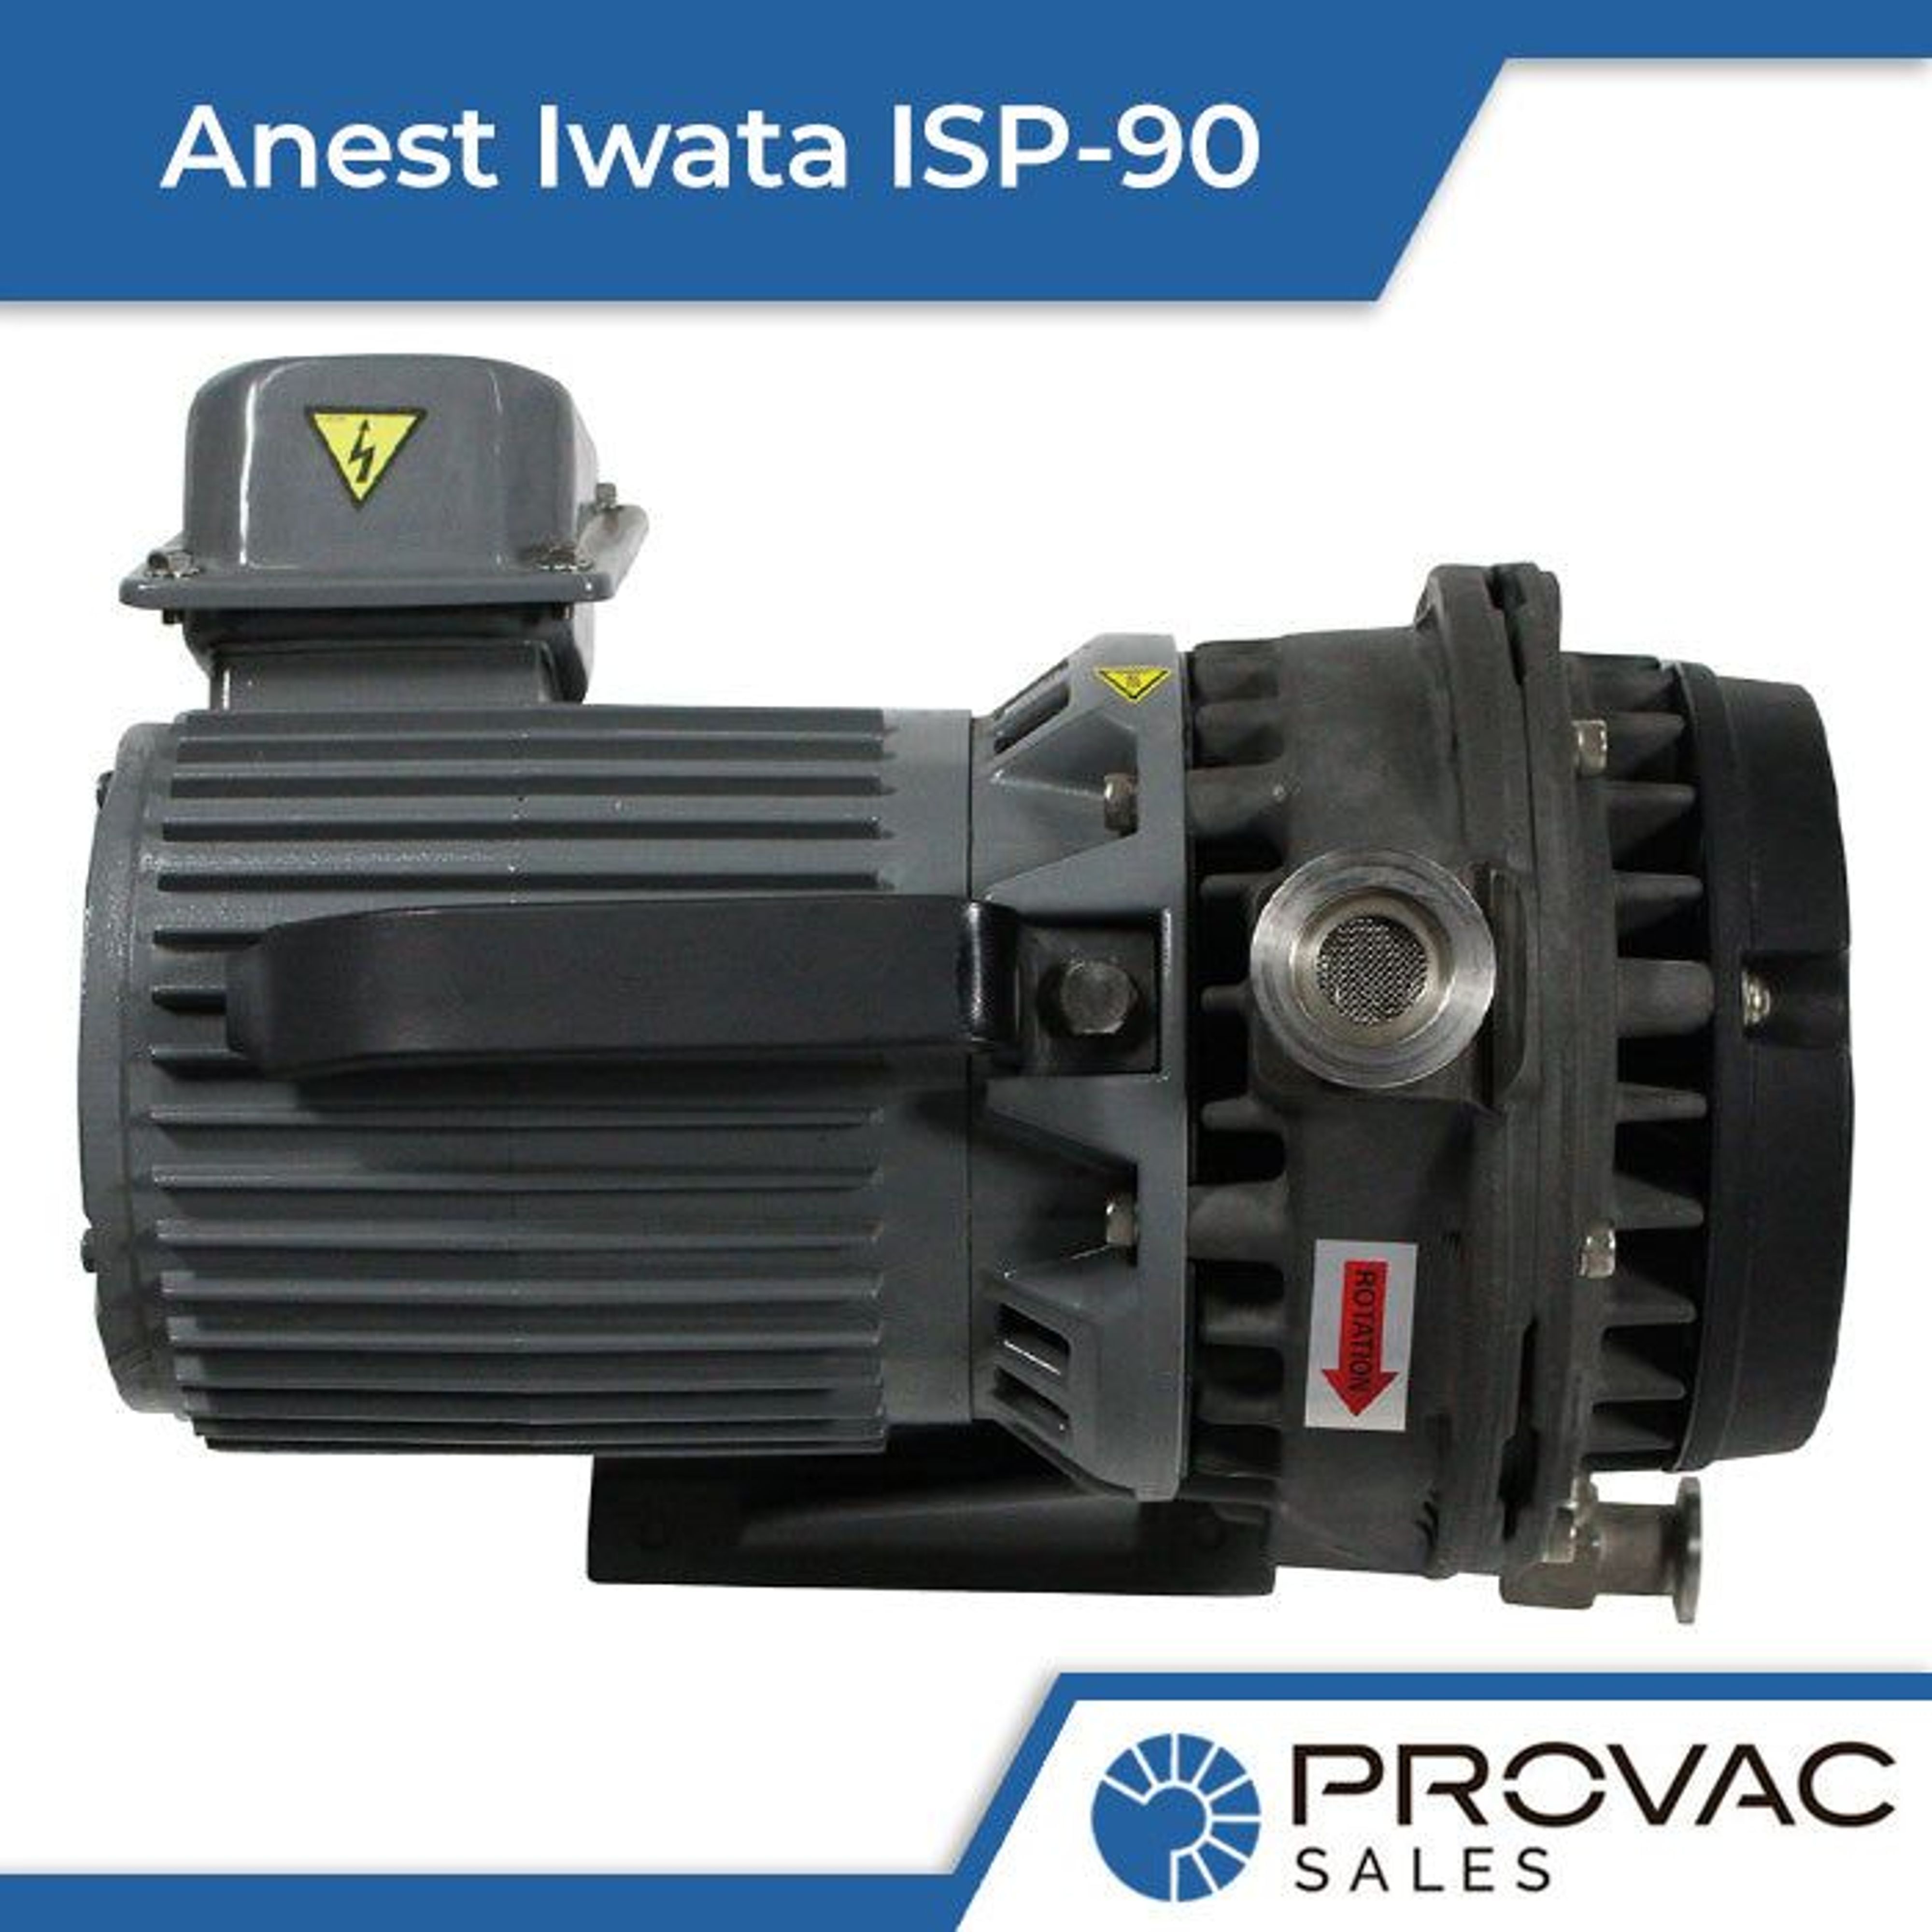 Anest Iwata ISP-90 Scroll Pump: Ready To Ship, In Stock Background